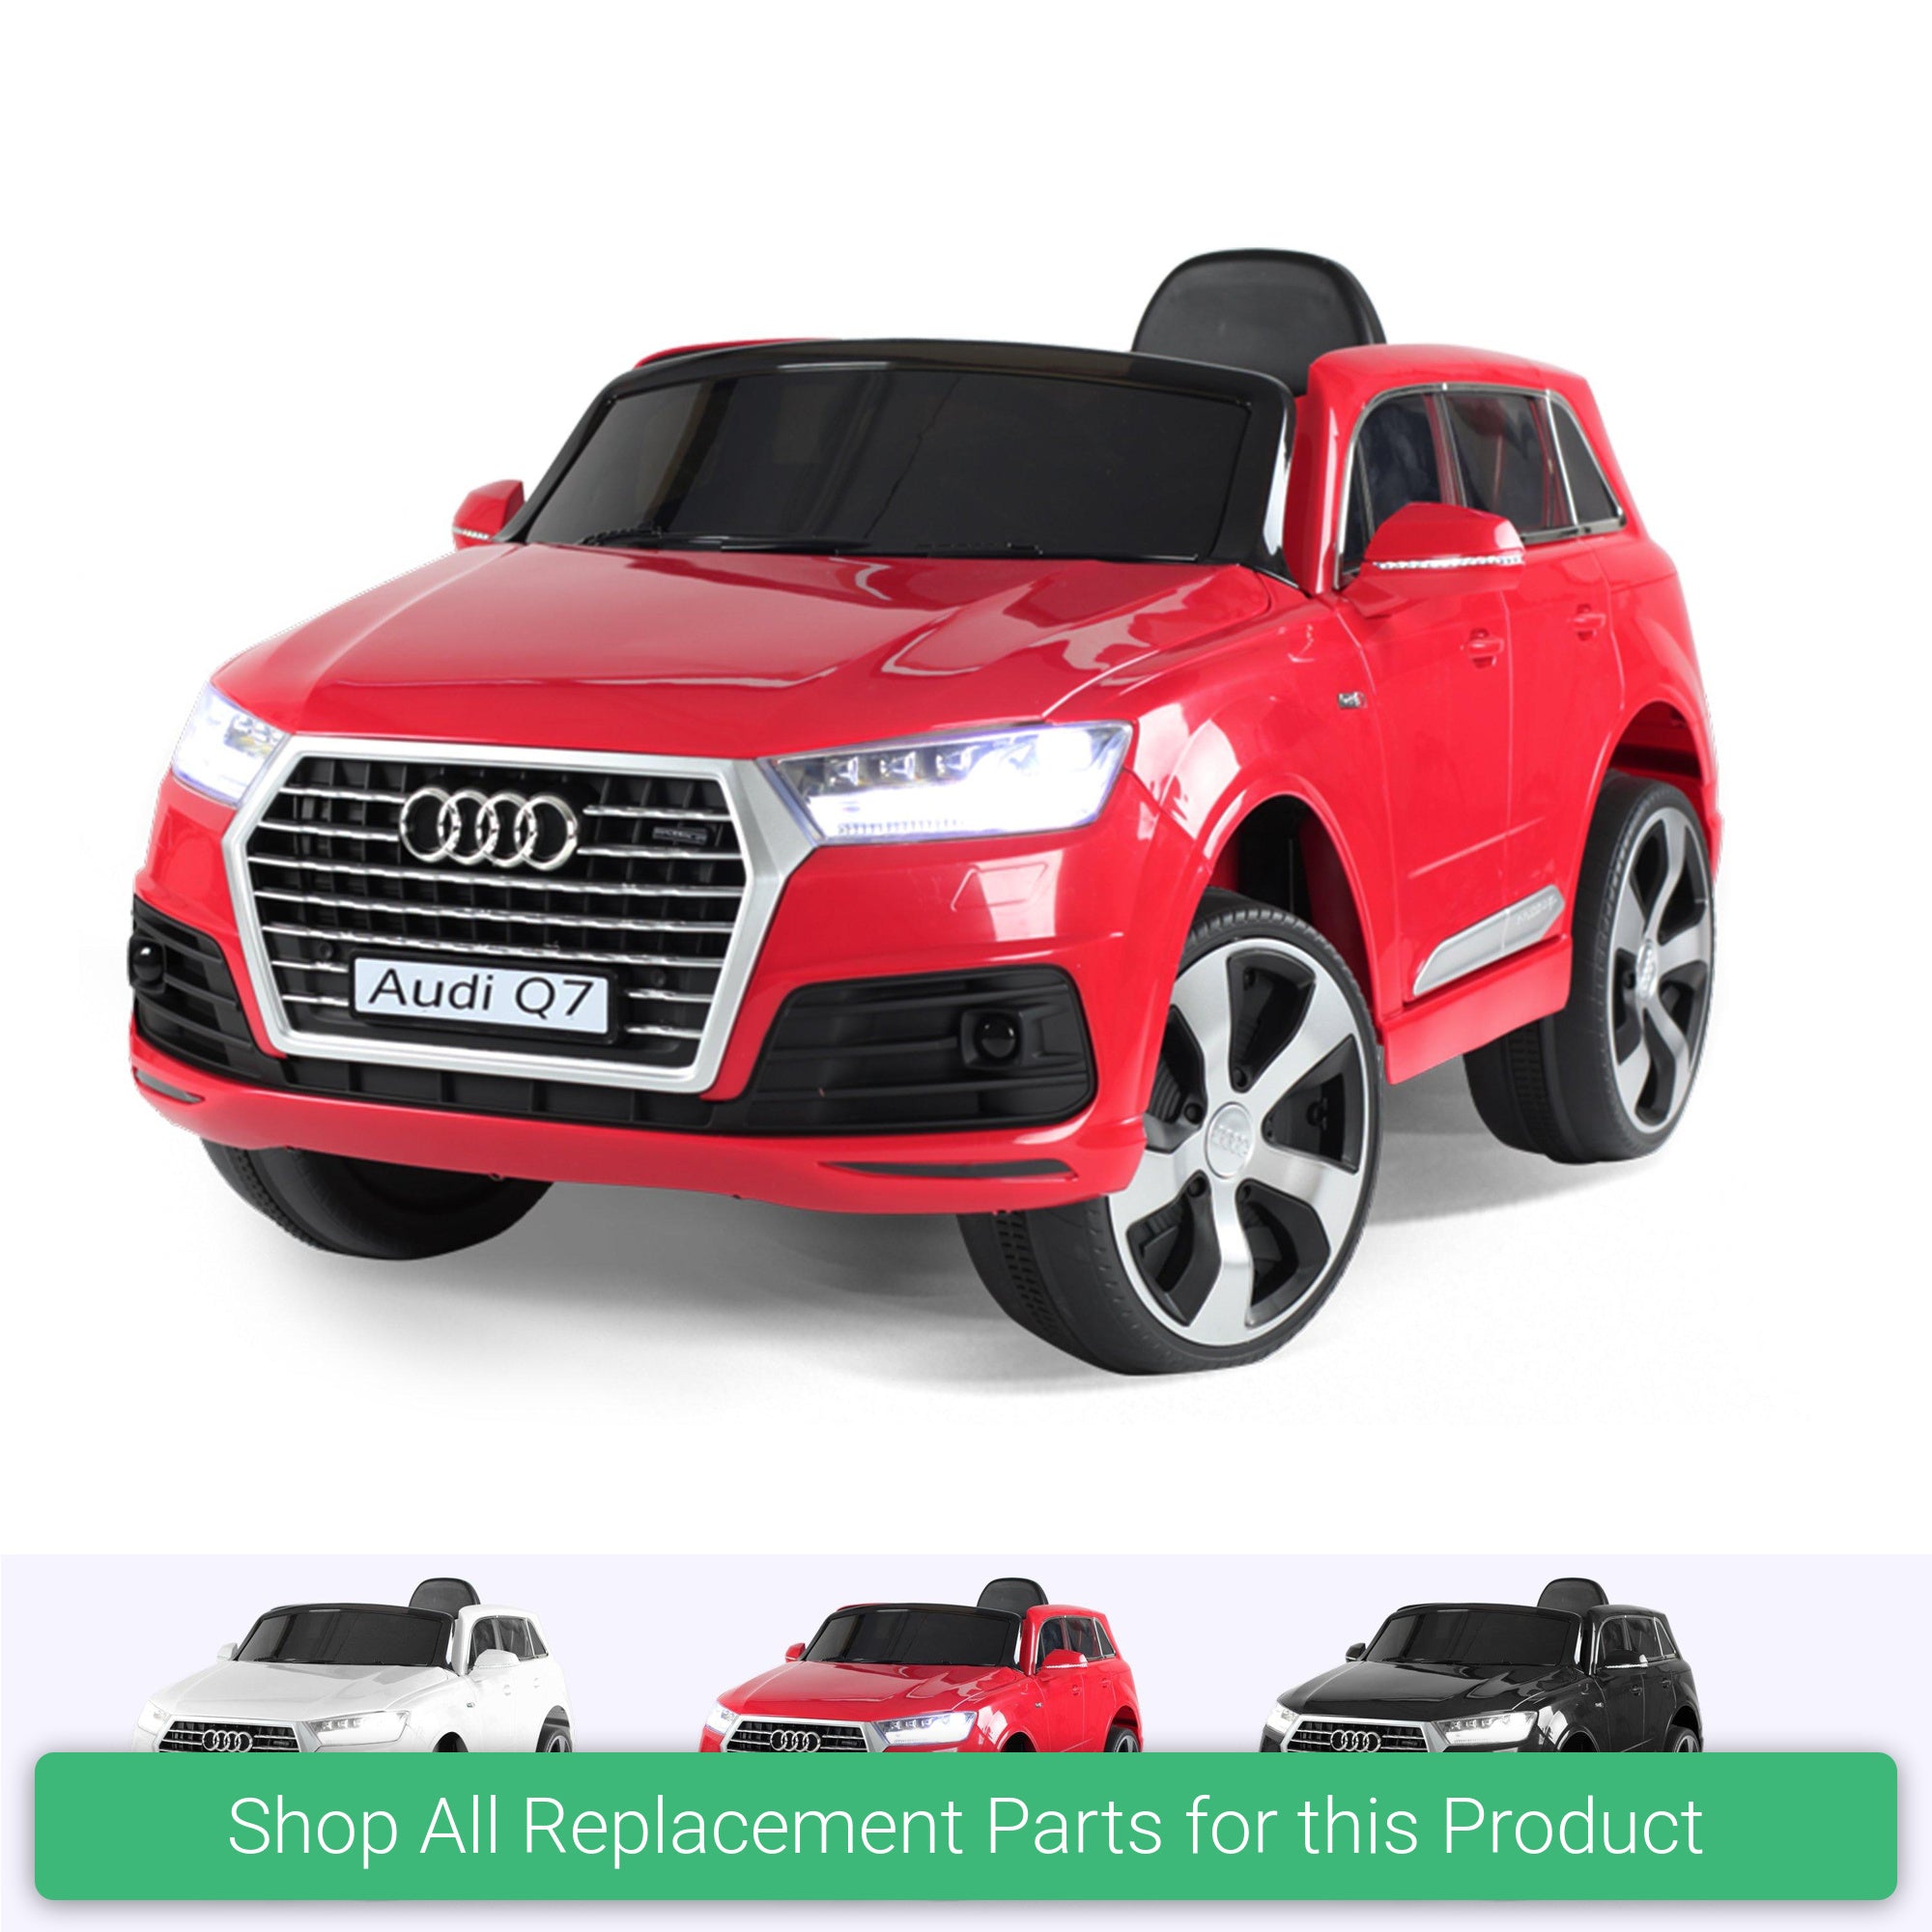 Replacement Parts and Spares for Kids Audi Q7 - AQQ716-2016 - JJ2188